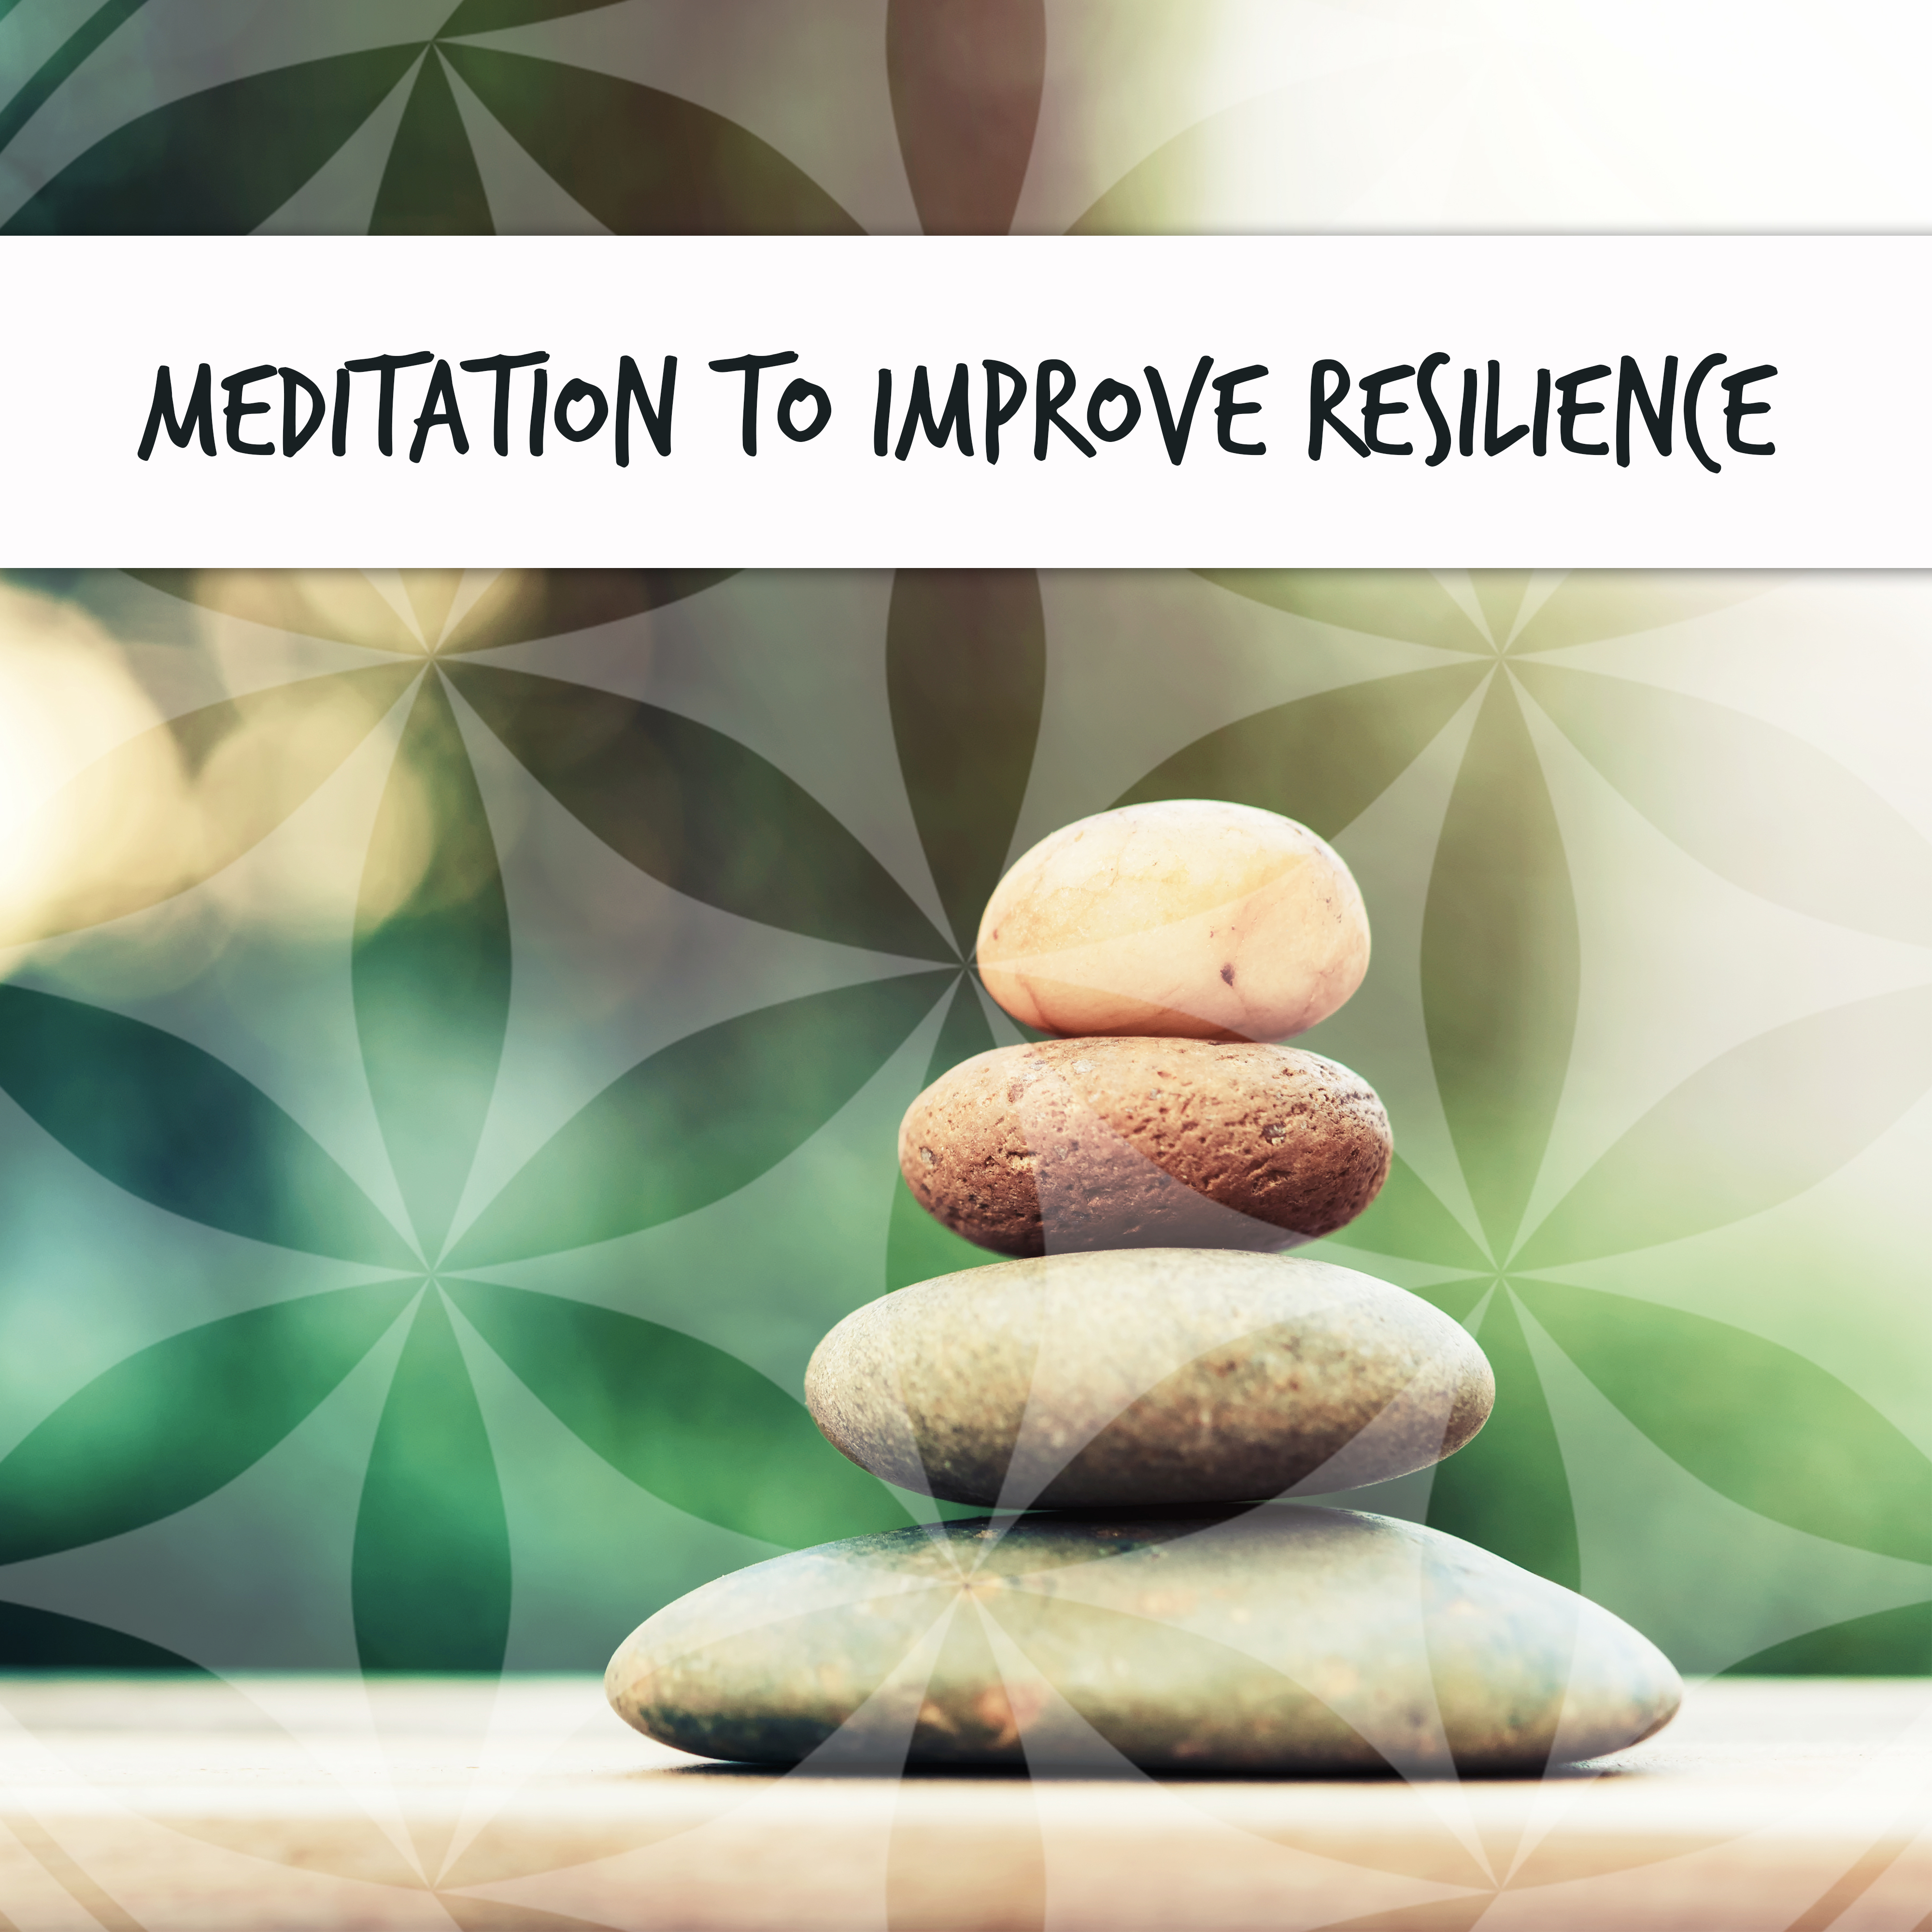 Meditation to Improve Resilience